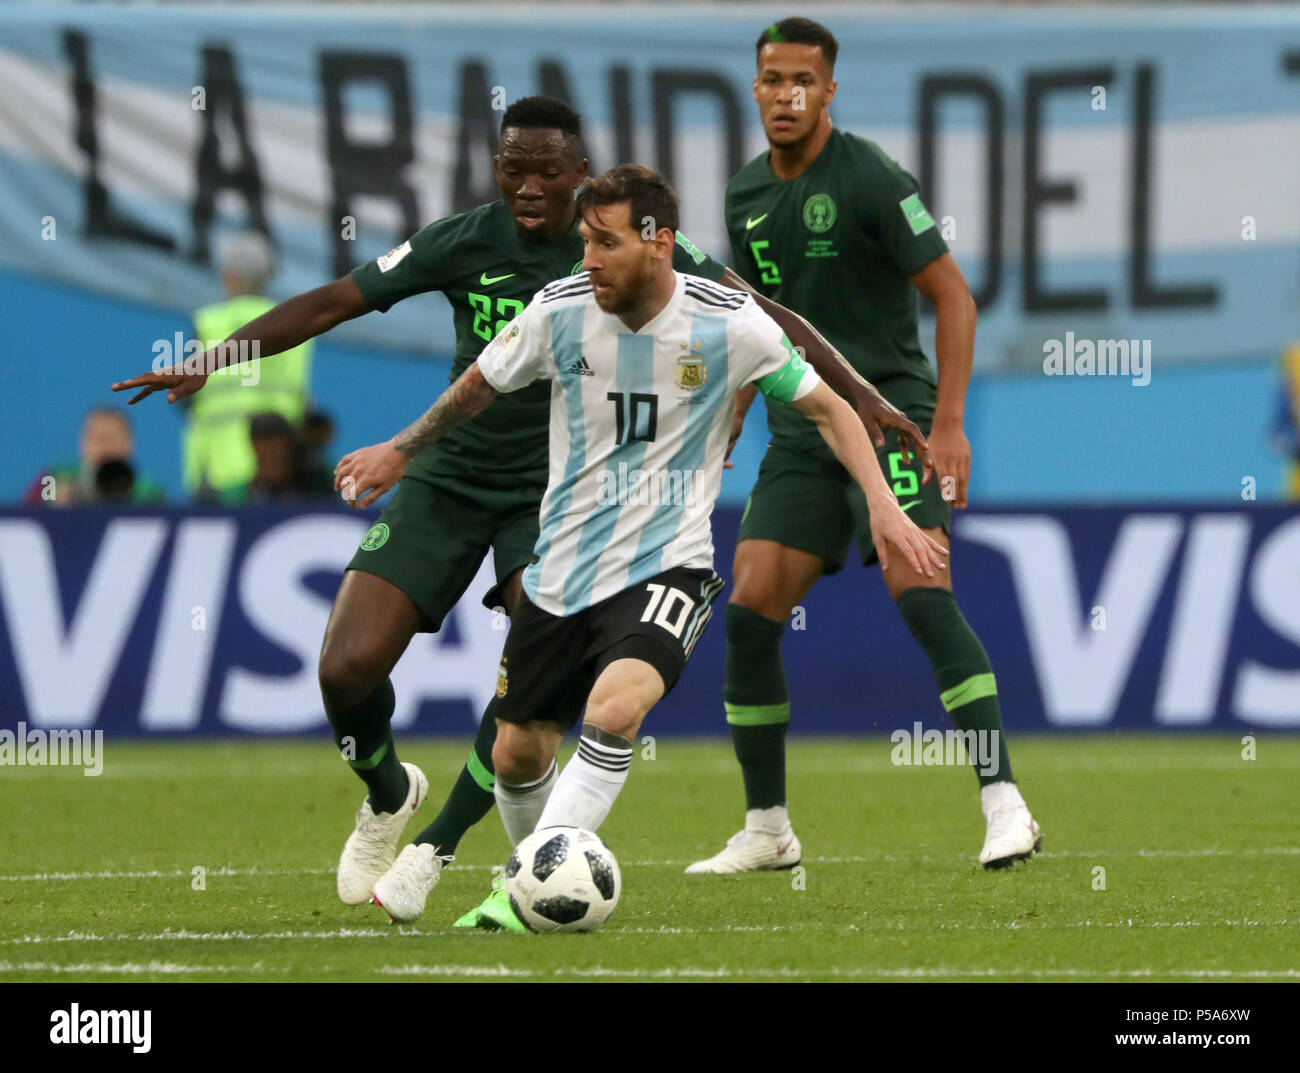 Moscow, Russia. 26th June, 2018. Soccer, World Cup 2018, Preliminary round, Group D, 3rd game day, Nigeria vs Argentina at the St. Petersburg Stadium: Argentina's Lionel Messi (C) and Nigeria's Kenneth Omeruo (L) vie for the ball. Credit: Cezaro De Luca/dpa/Alamy Live News Stock Photo